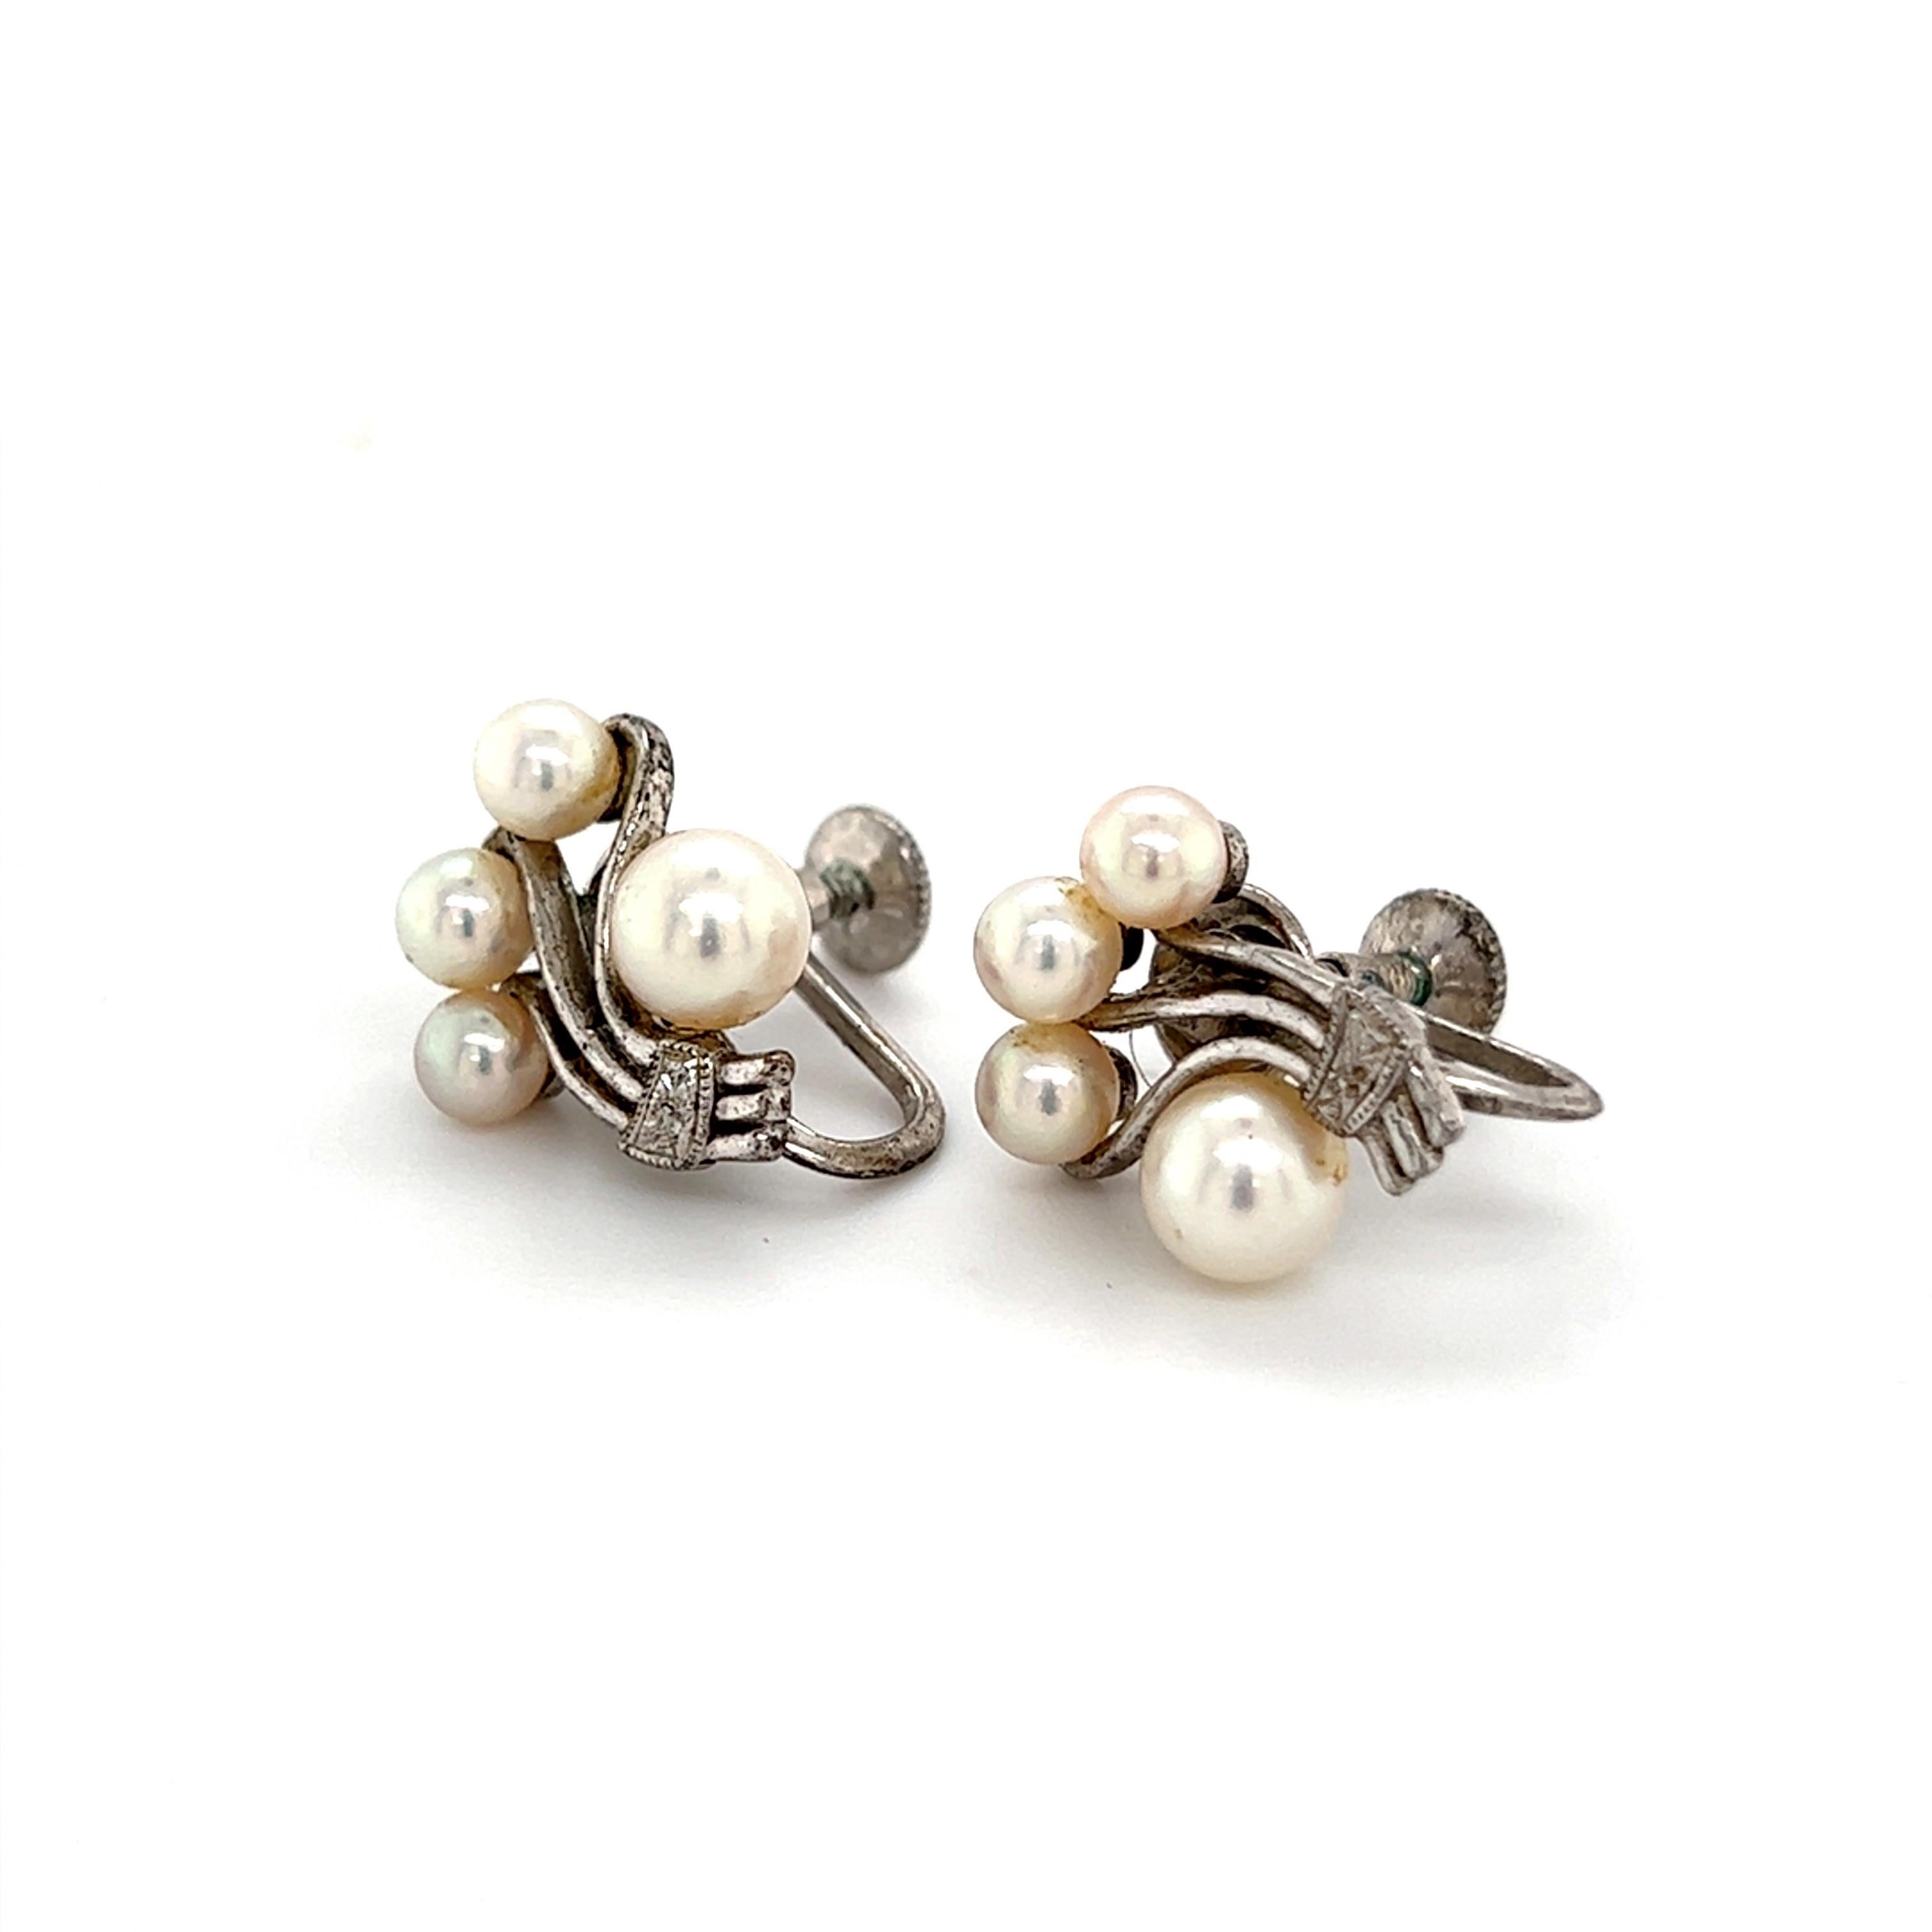 Mikimoto Estate Akoya Pearl Earrings Sterling Silver 5.75 mm 4.5 Grams M253

These elegant Authentic Mikimoto Estate Akoya pearl earrings are made of sterling silver and have 8 Akoya Cultured Pearls ranging in size from 4.2 - 5.75 mm with a weight